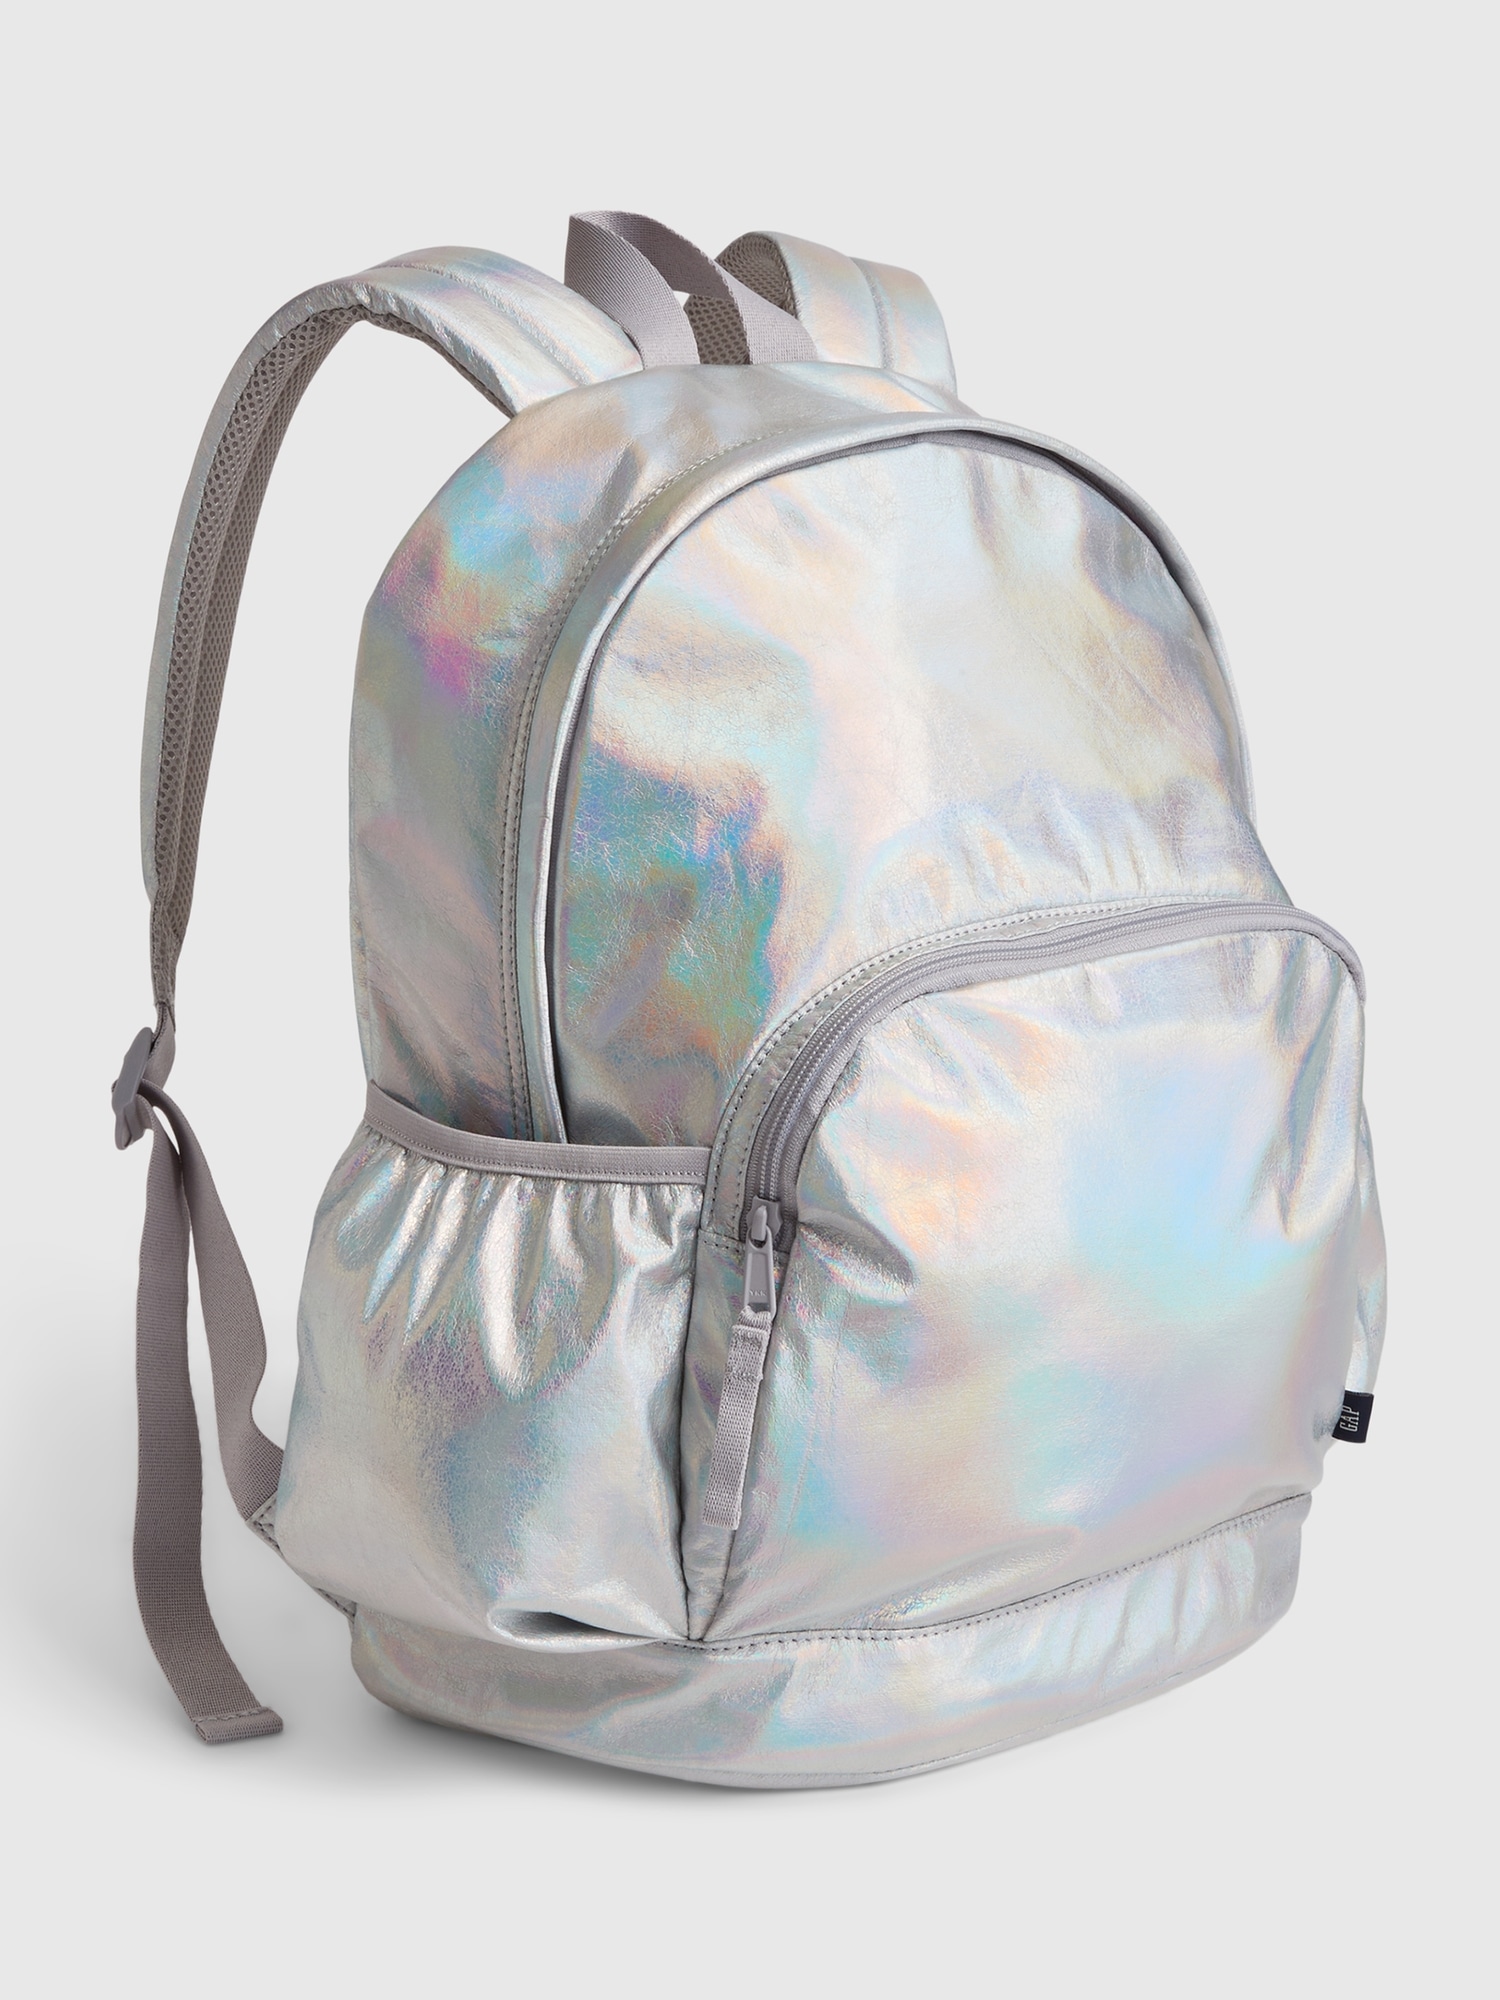 Girls' Recycled Backpack by Gap Silver Iridescent One Size